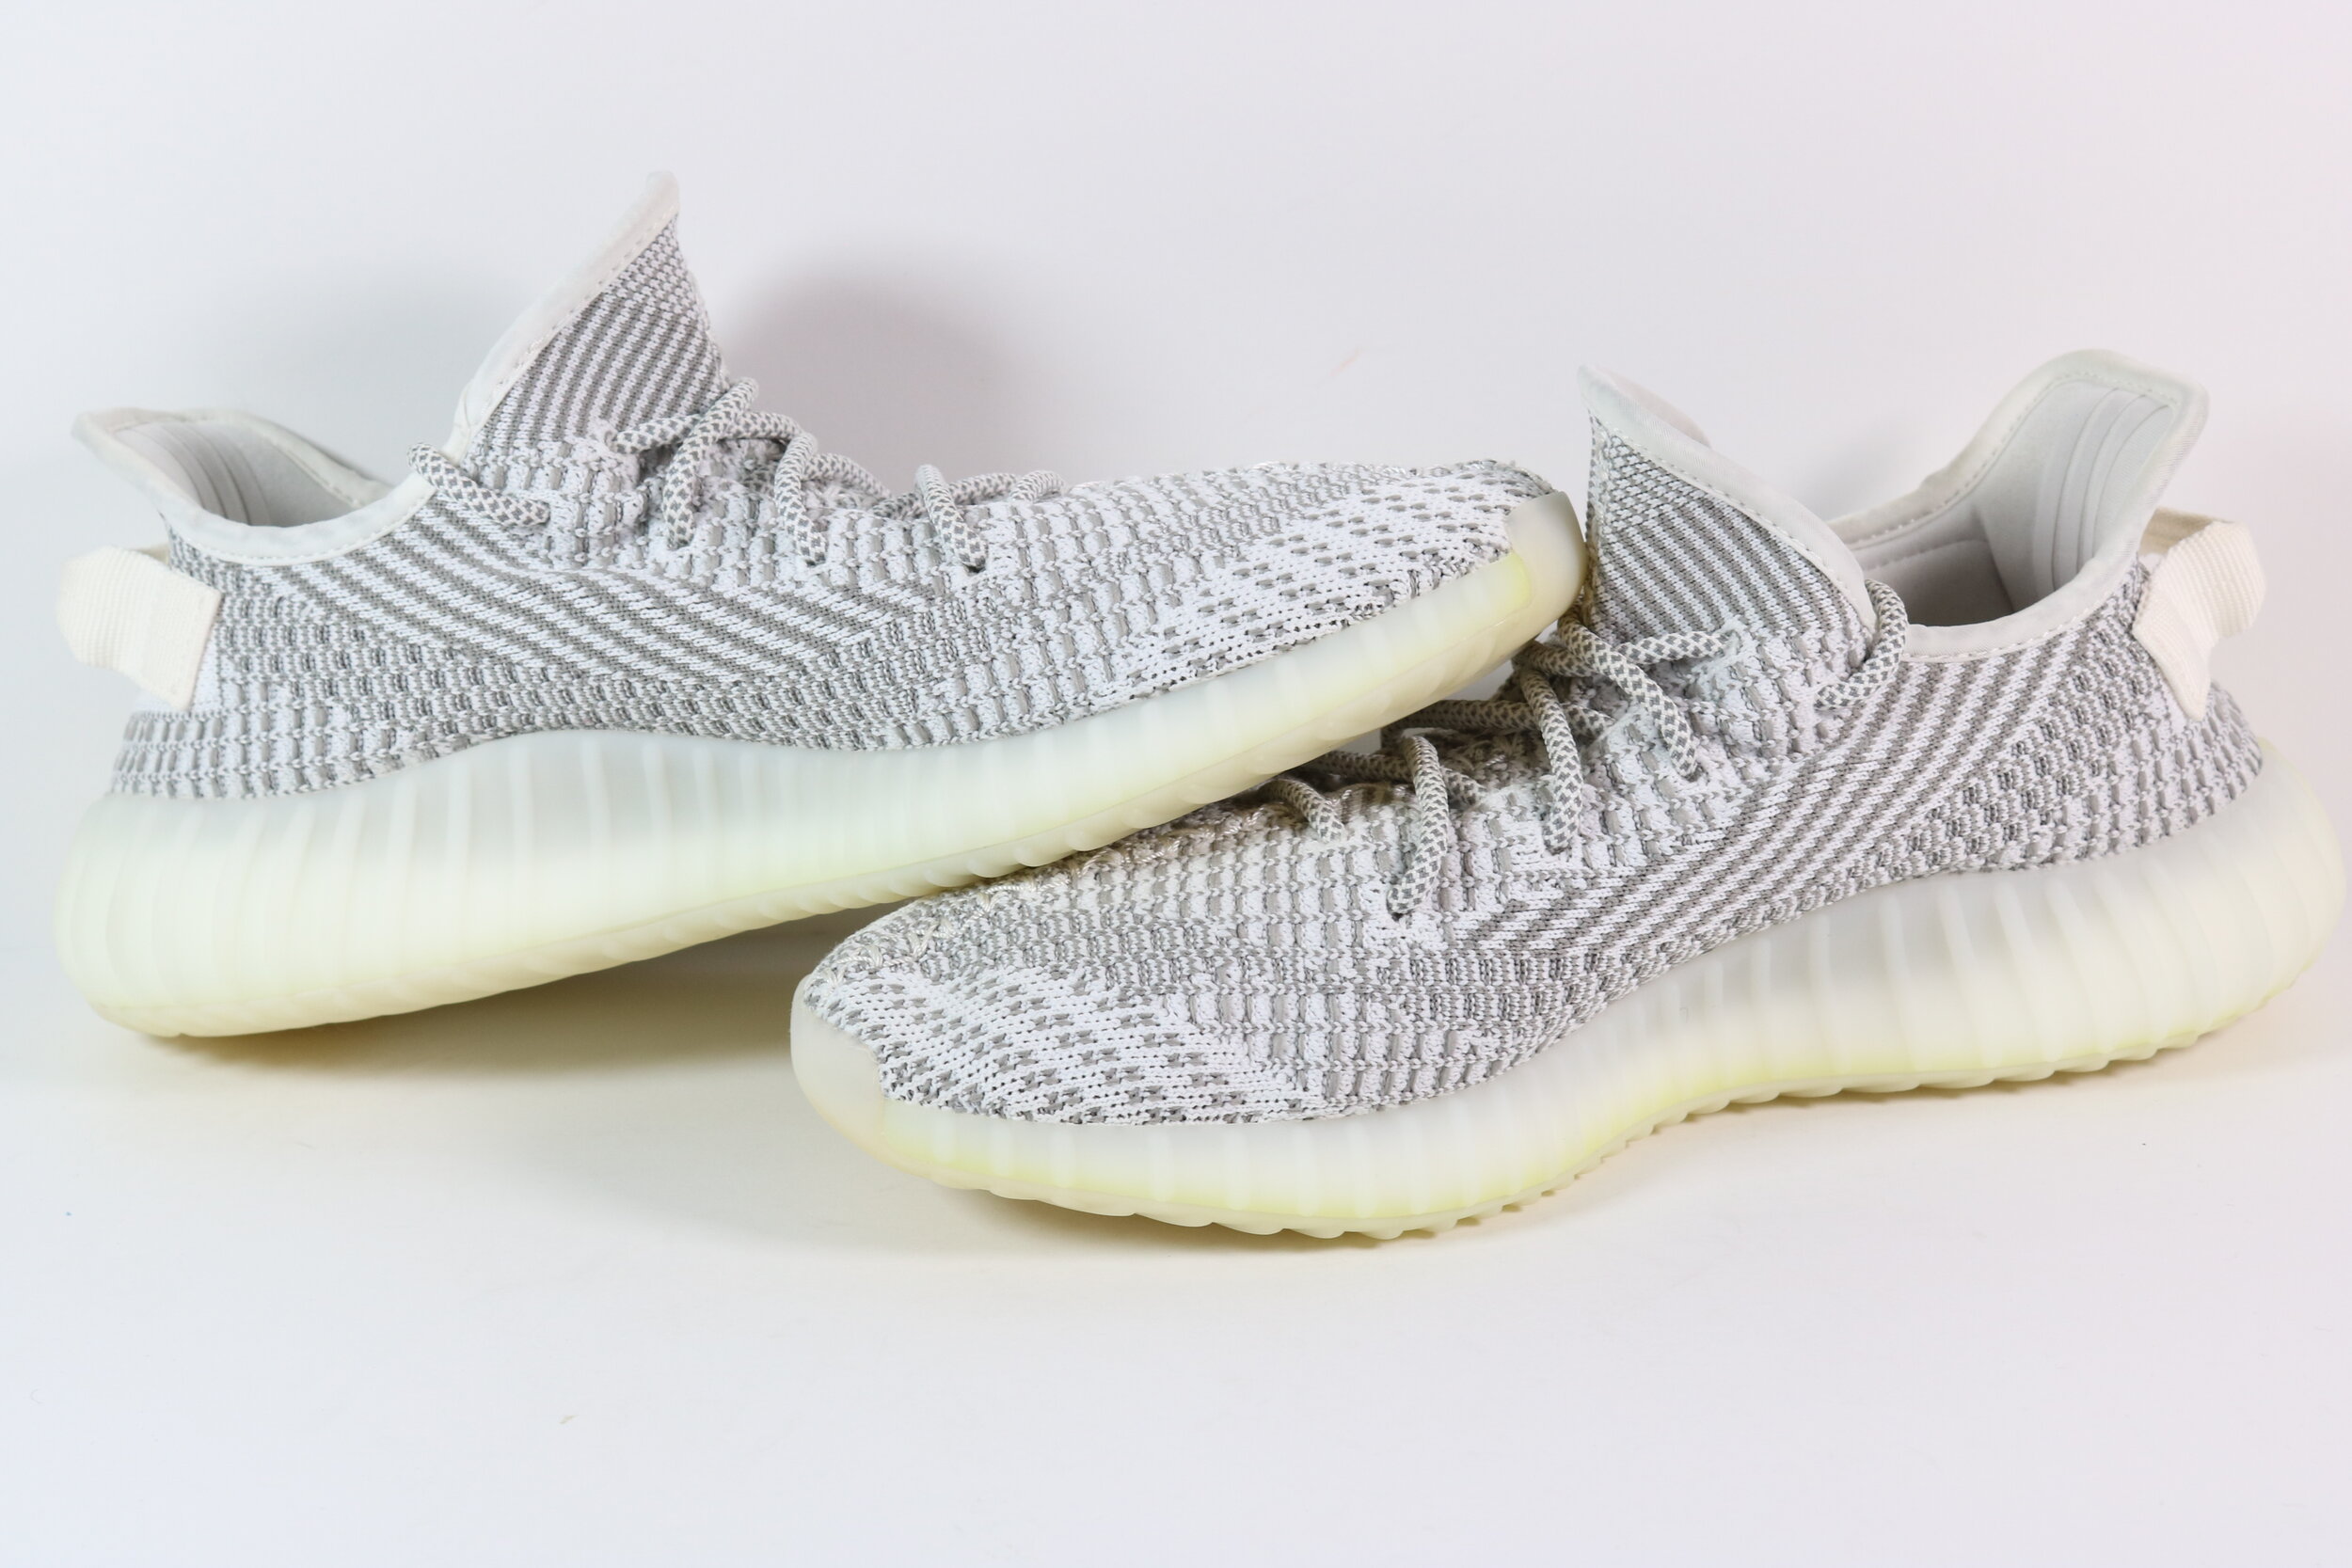 yeezy boost 350 v2 static non reflective price